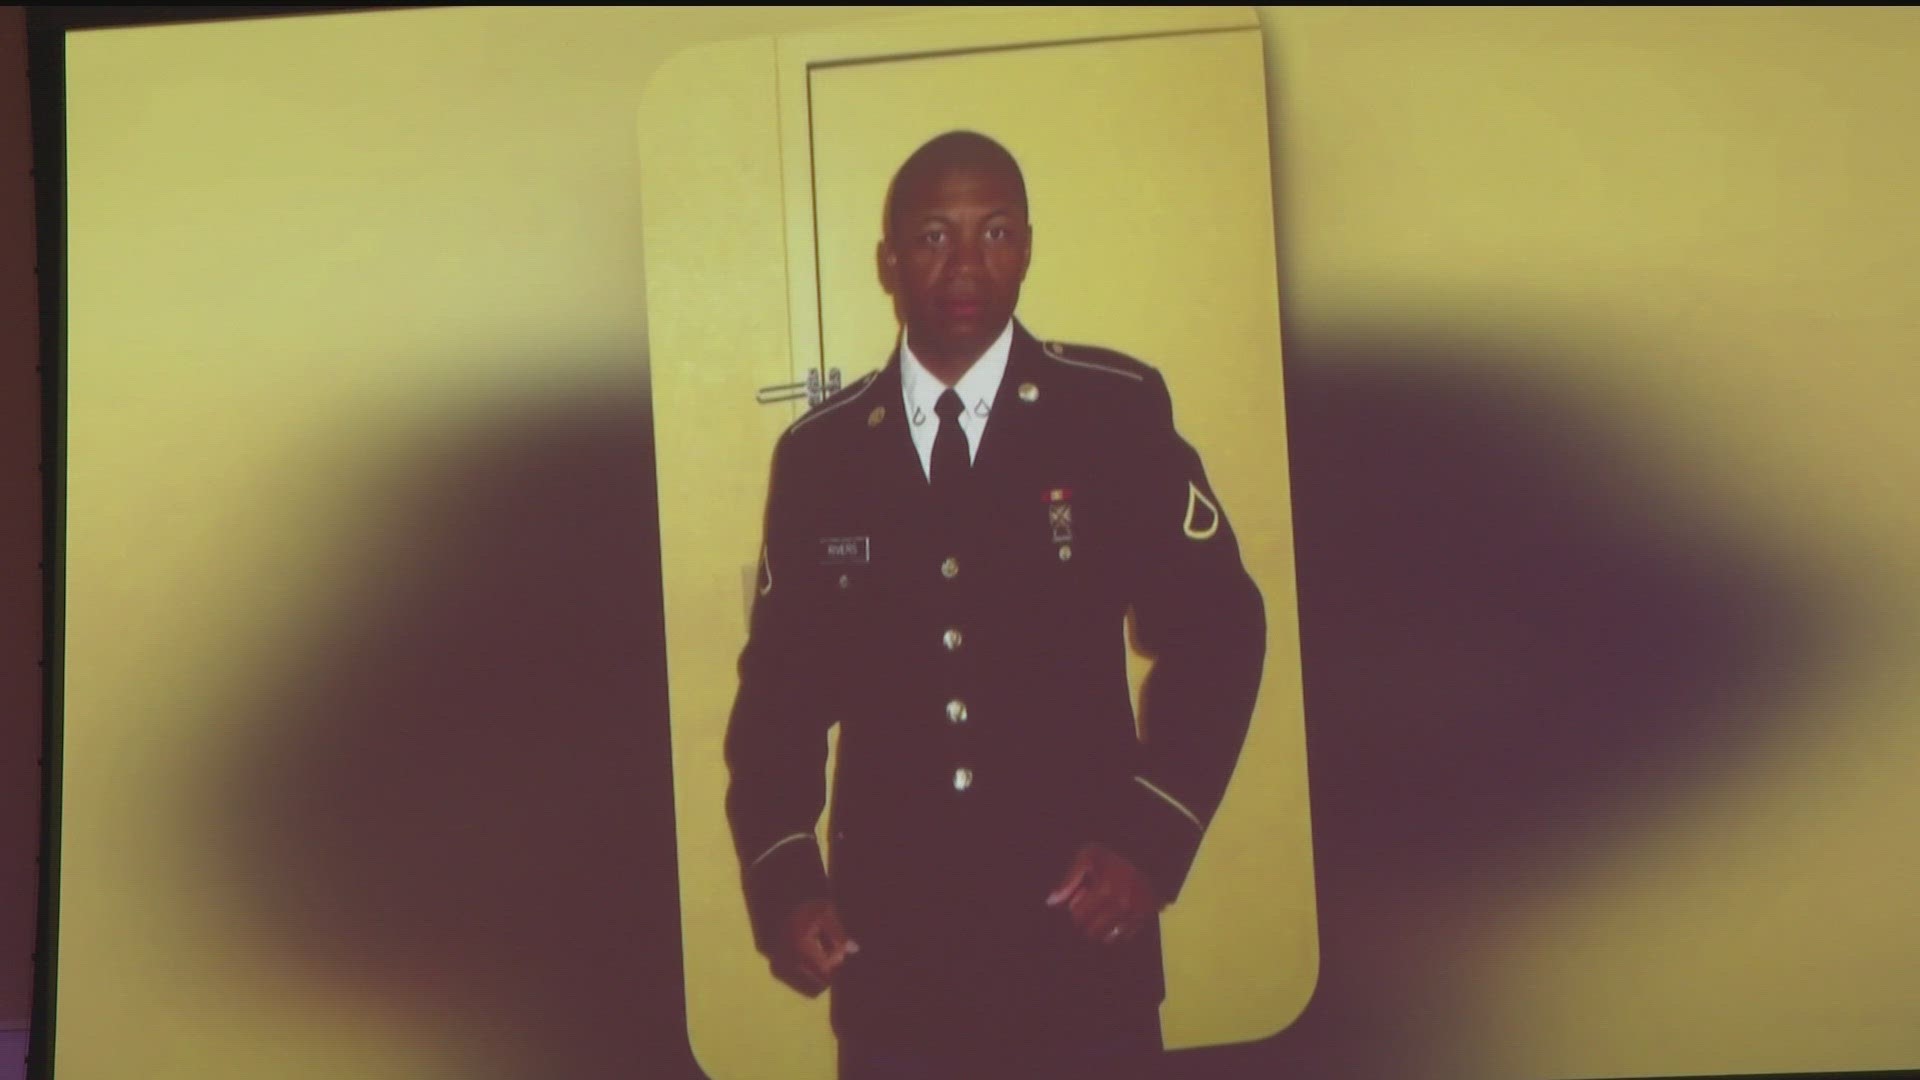 The funeral service for Sgt. Rivers was held at 10 a.m. at Tabernacle Baptist Church in Carrollton. After the service, a procession traveled to Canton for a private